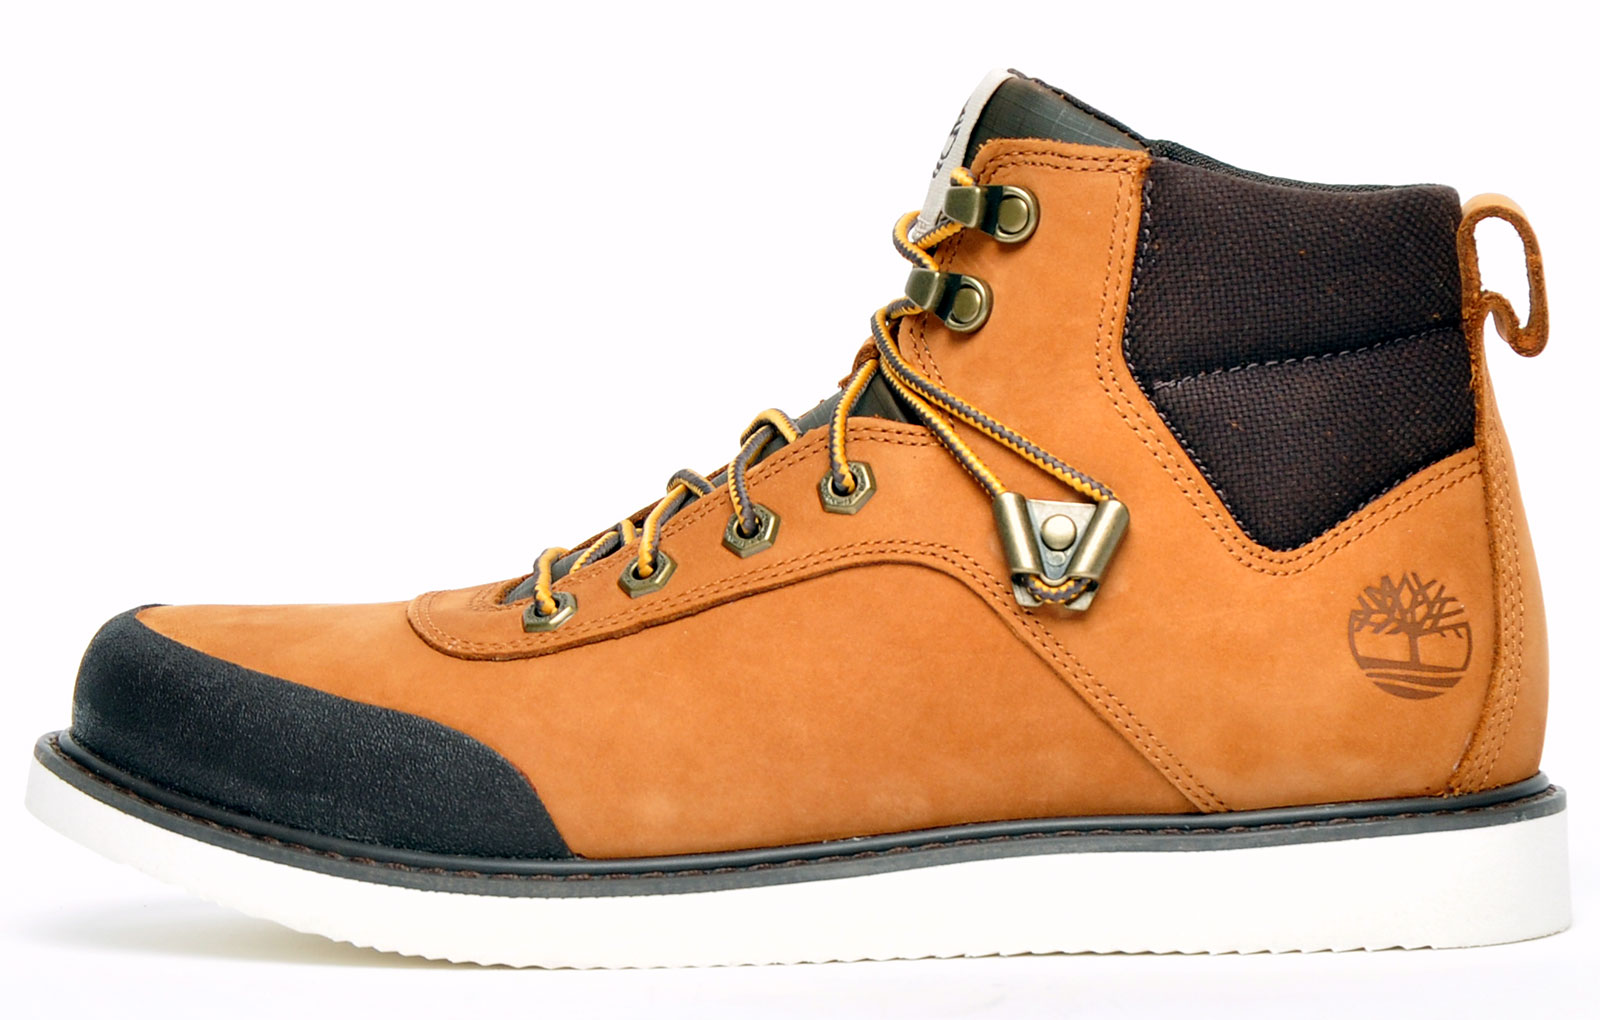 Timberland Boots for Men | Cheap Timberland Boots | Timberland Boots